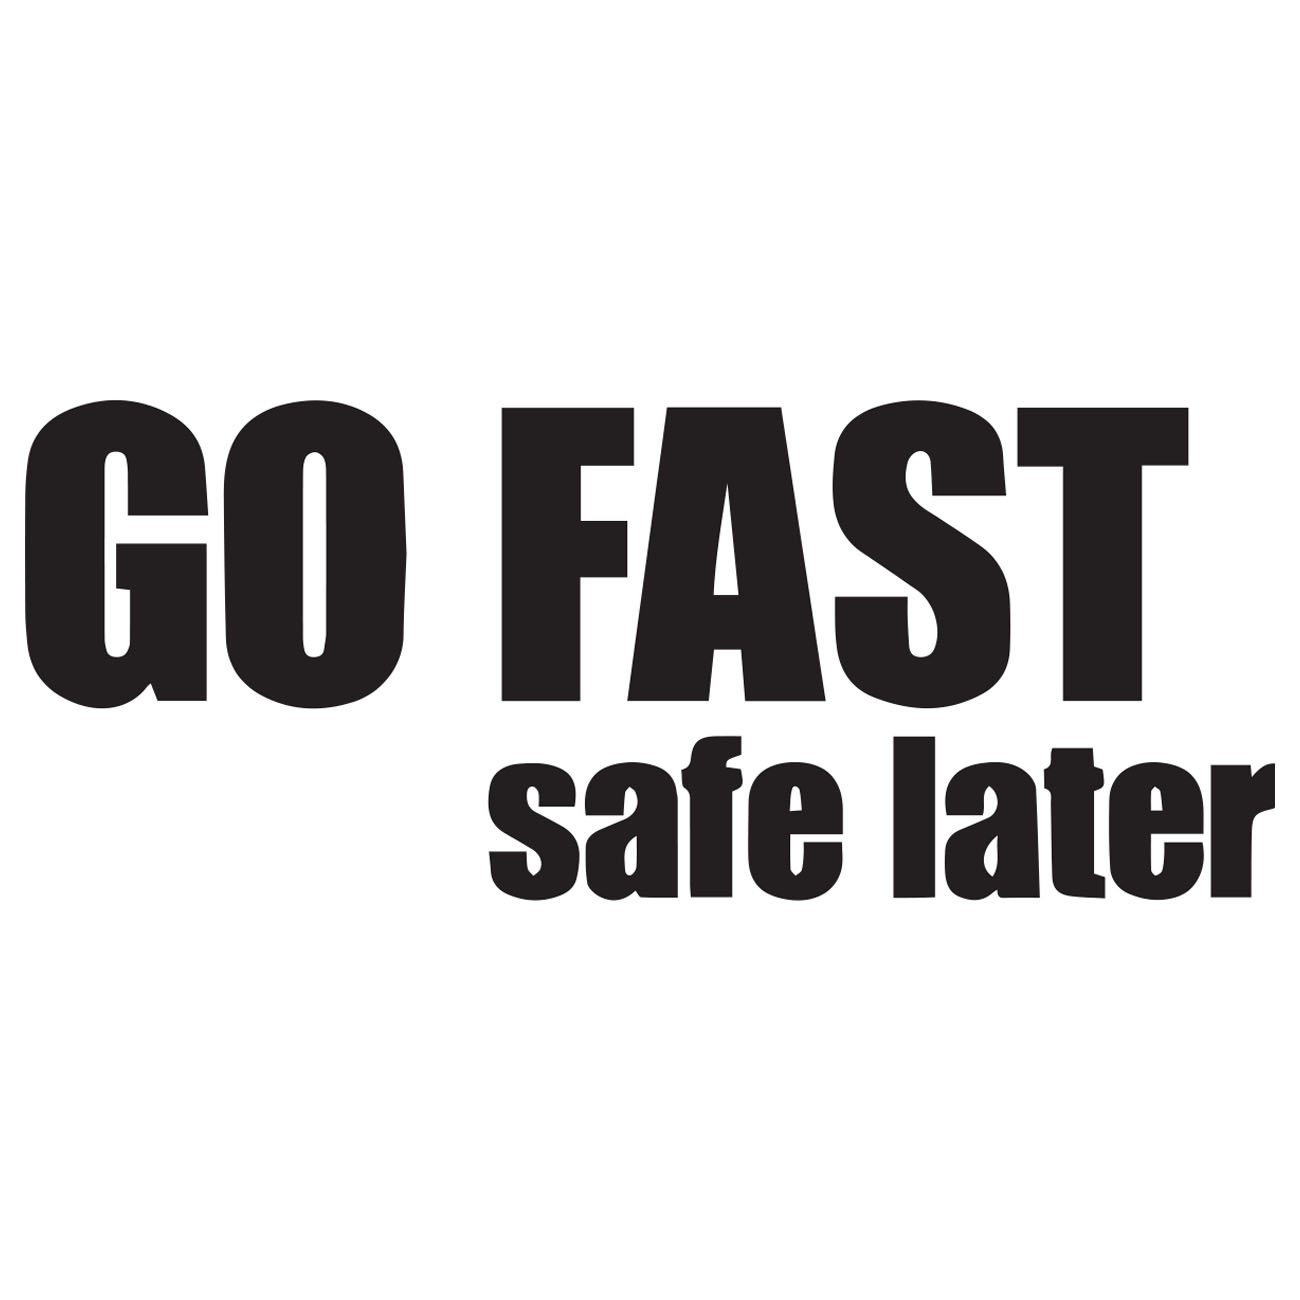 Go fast - safe later